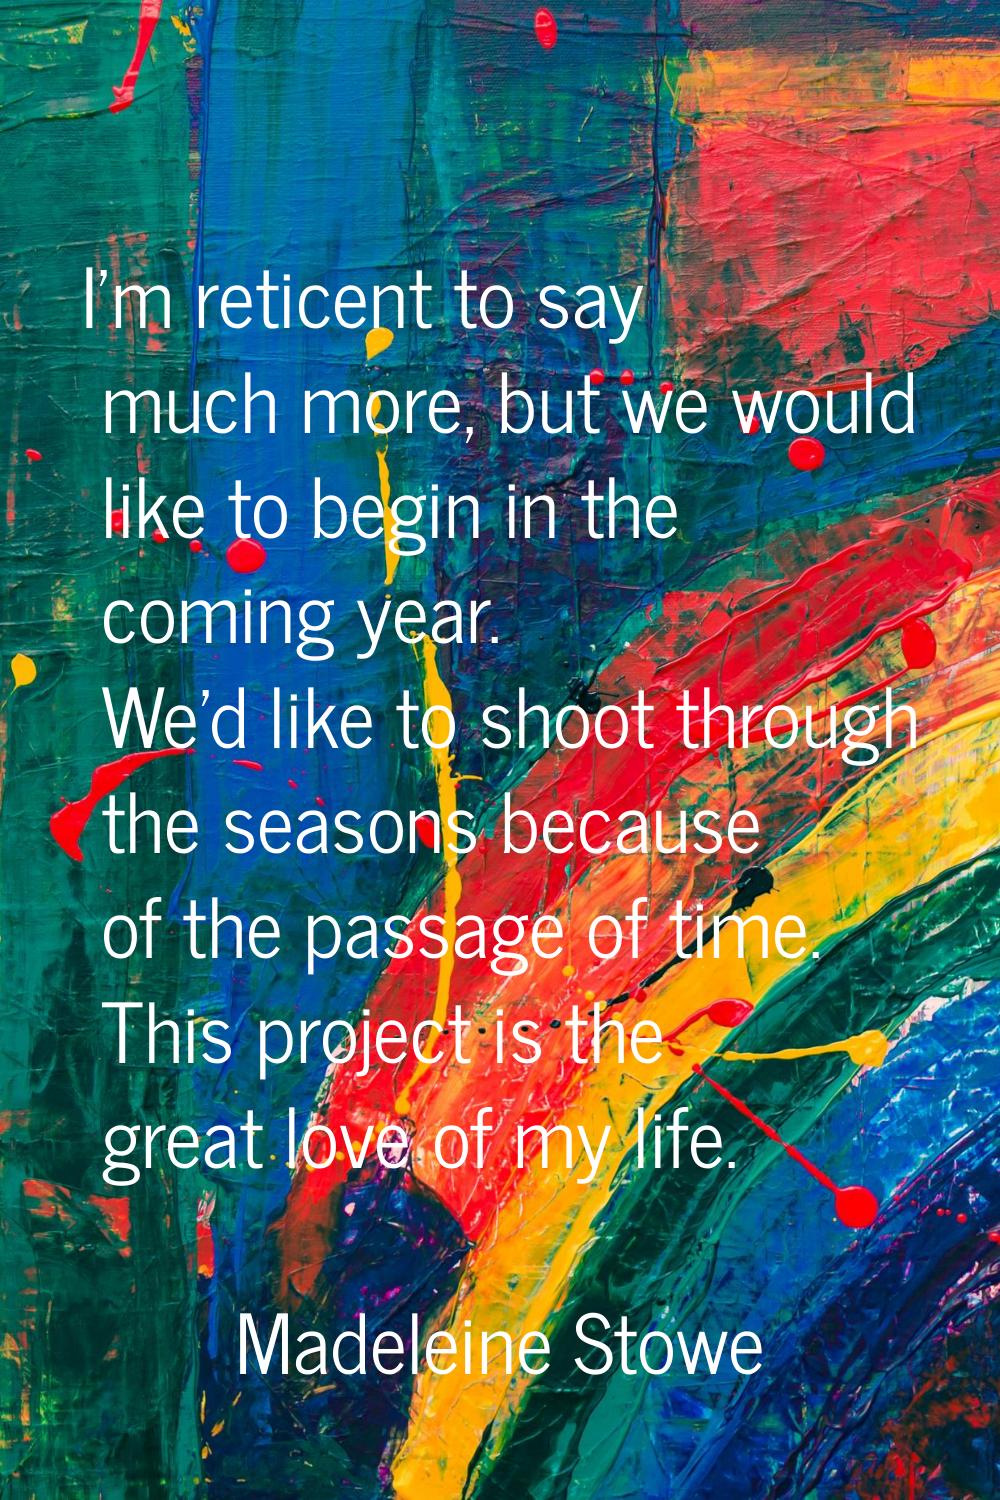 I'm reticent to say much more, but we would like to begin in the coming year. We'd like to shoot th